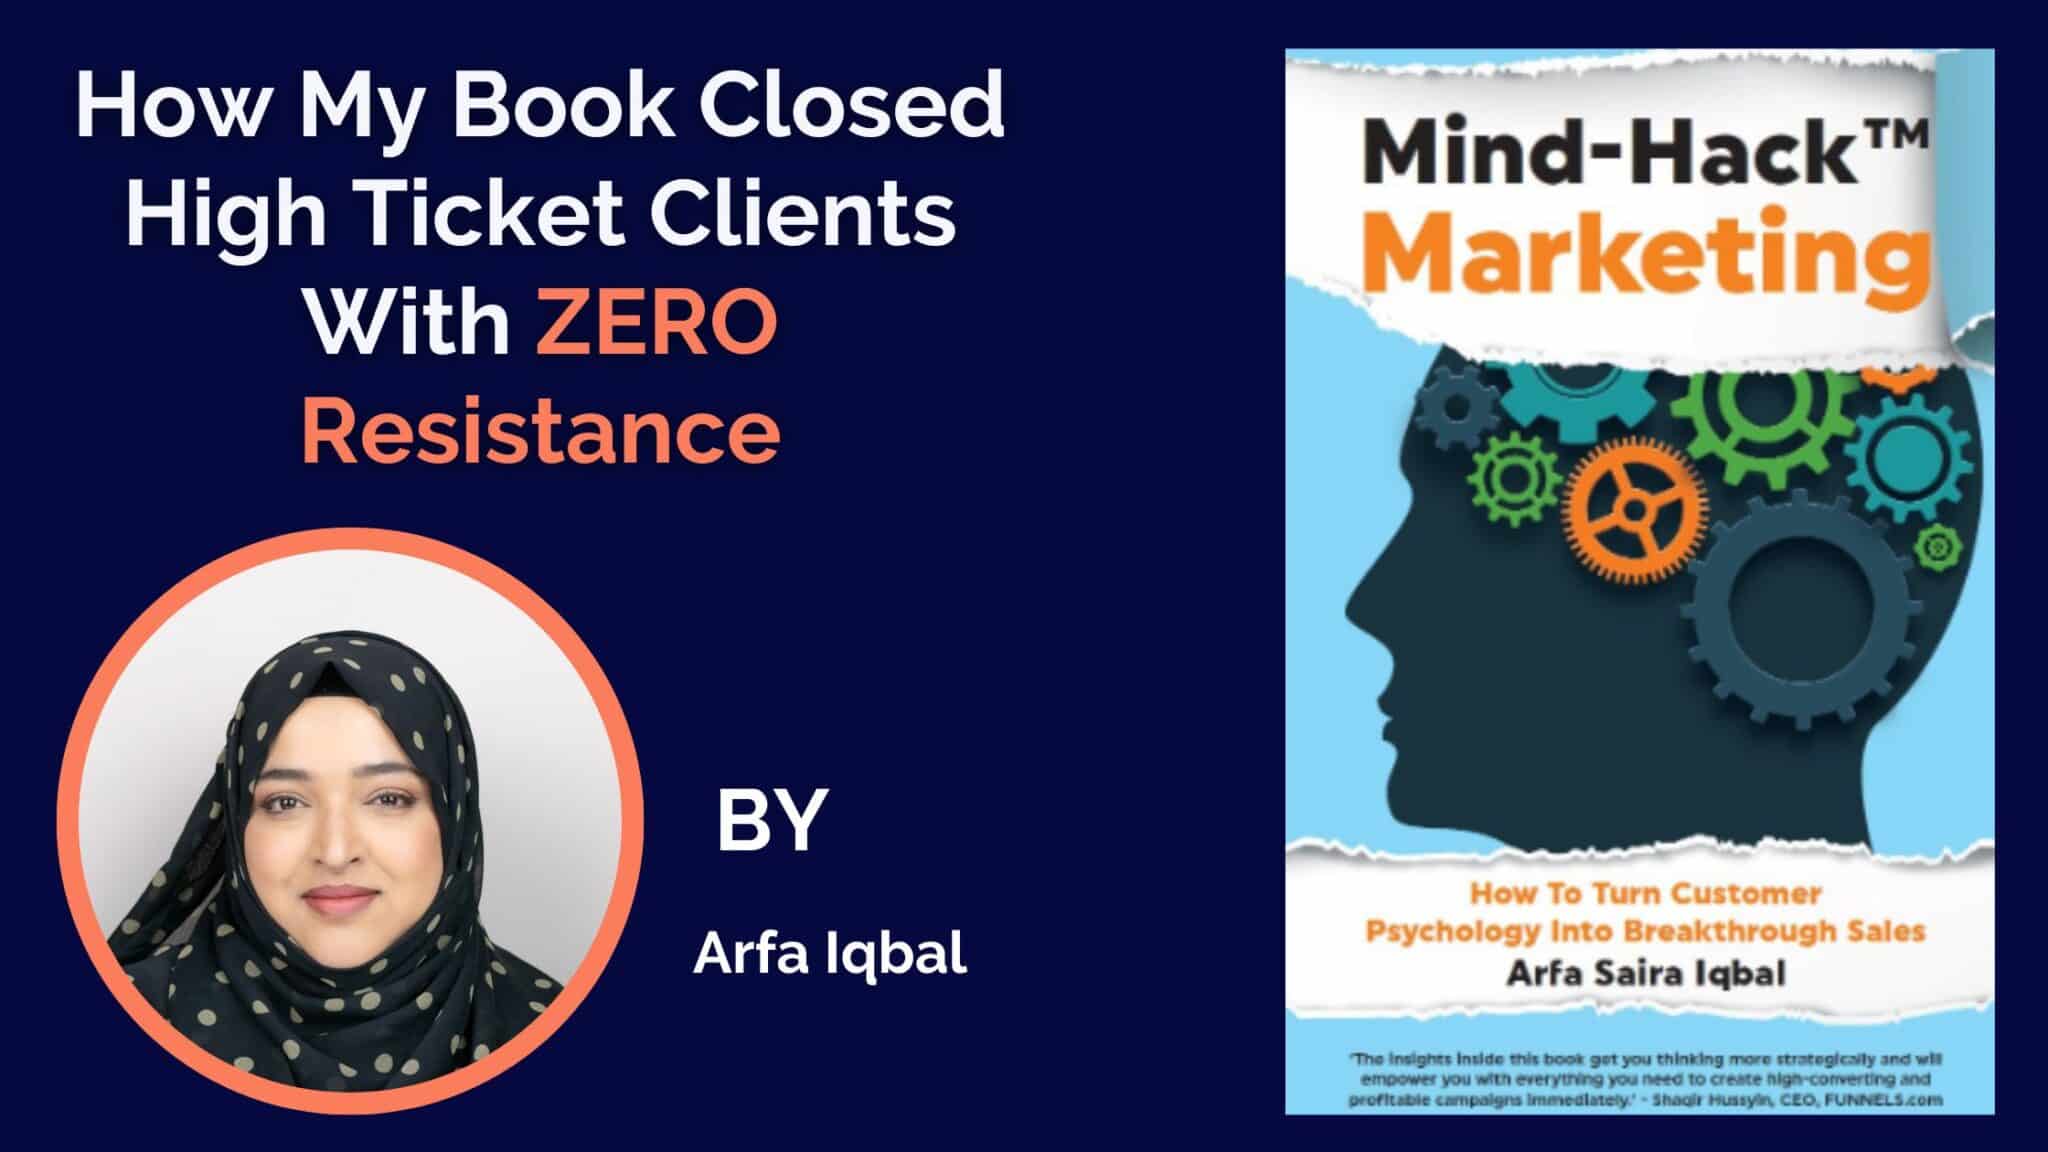 How My Book Closed High Ticket Clients With ZERO Resistance